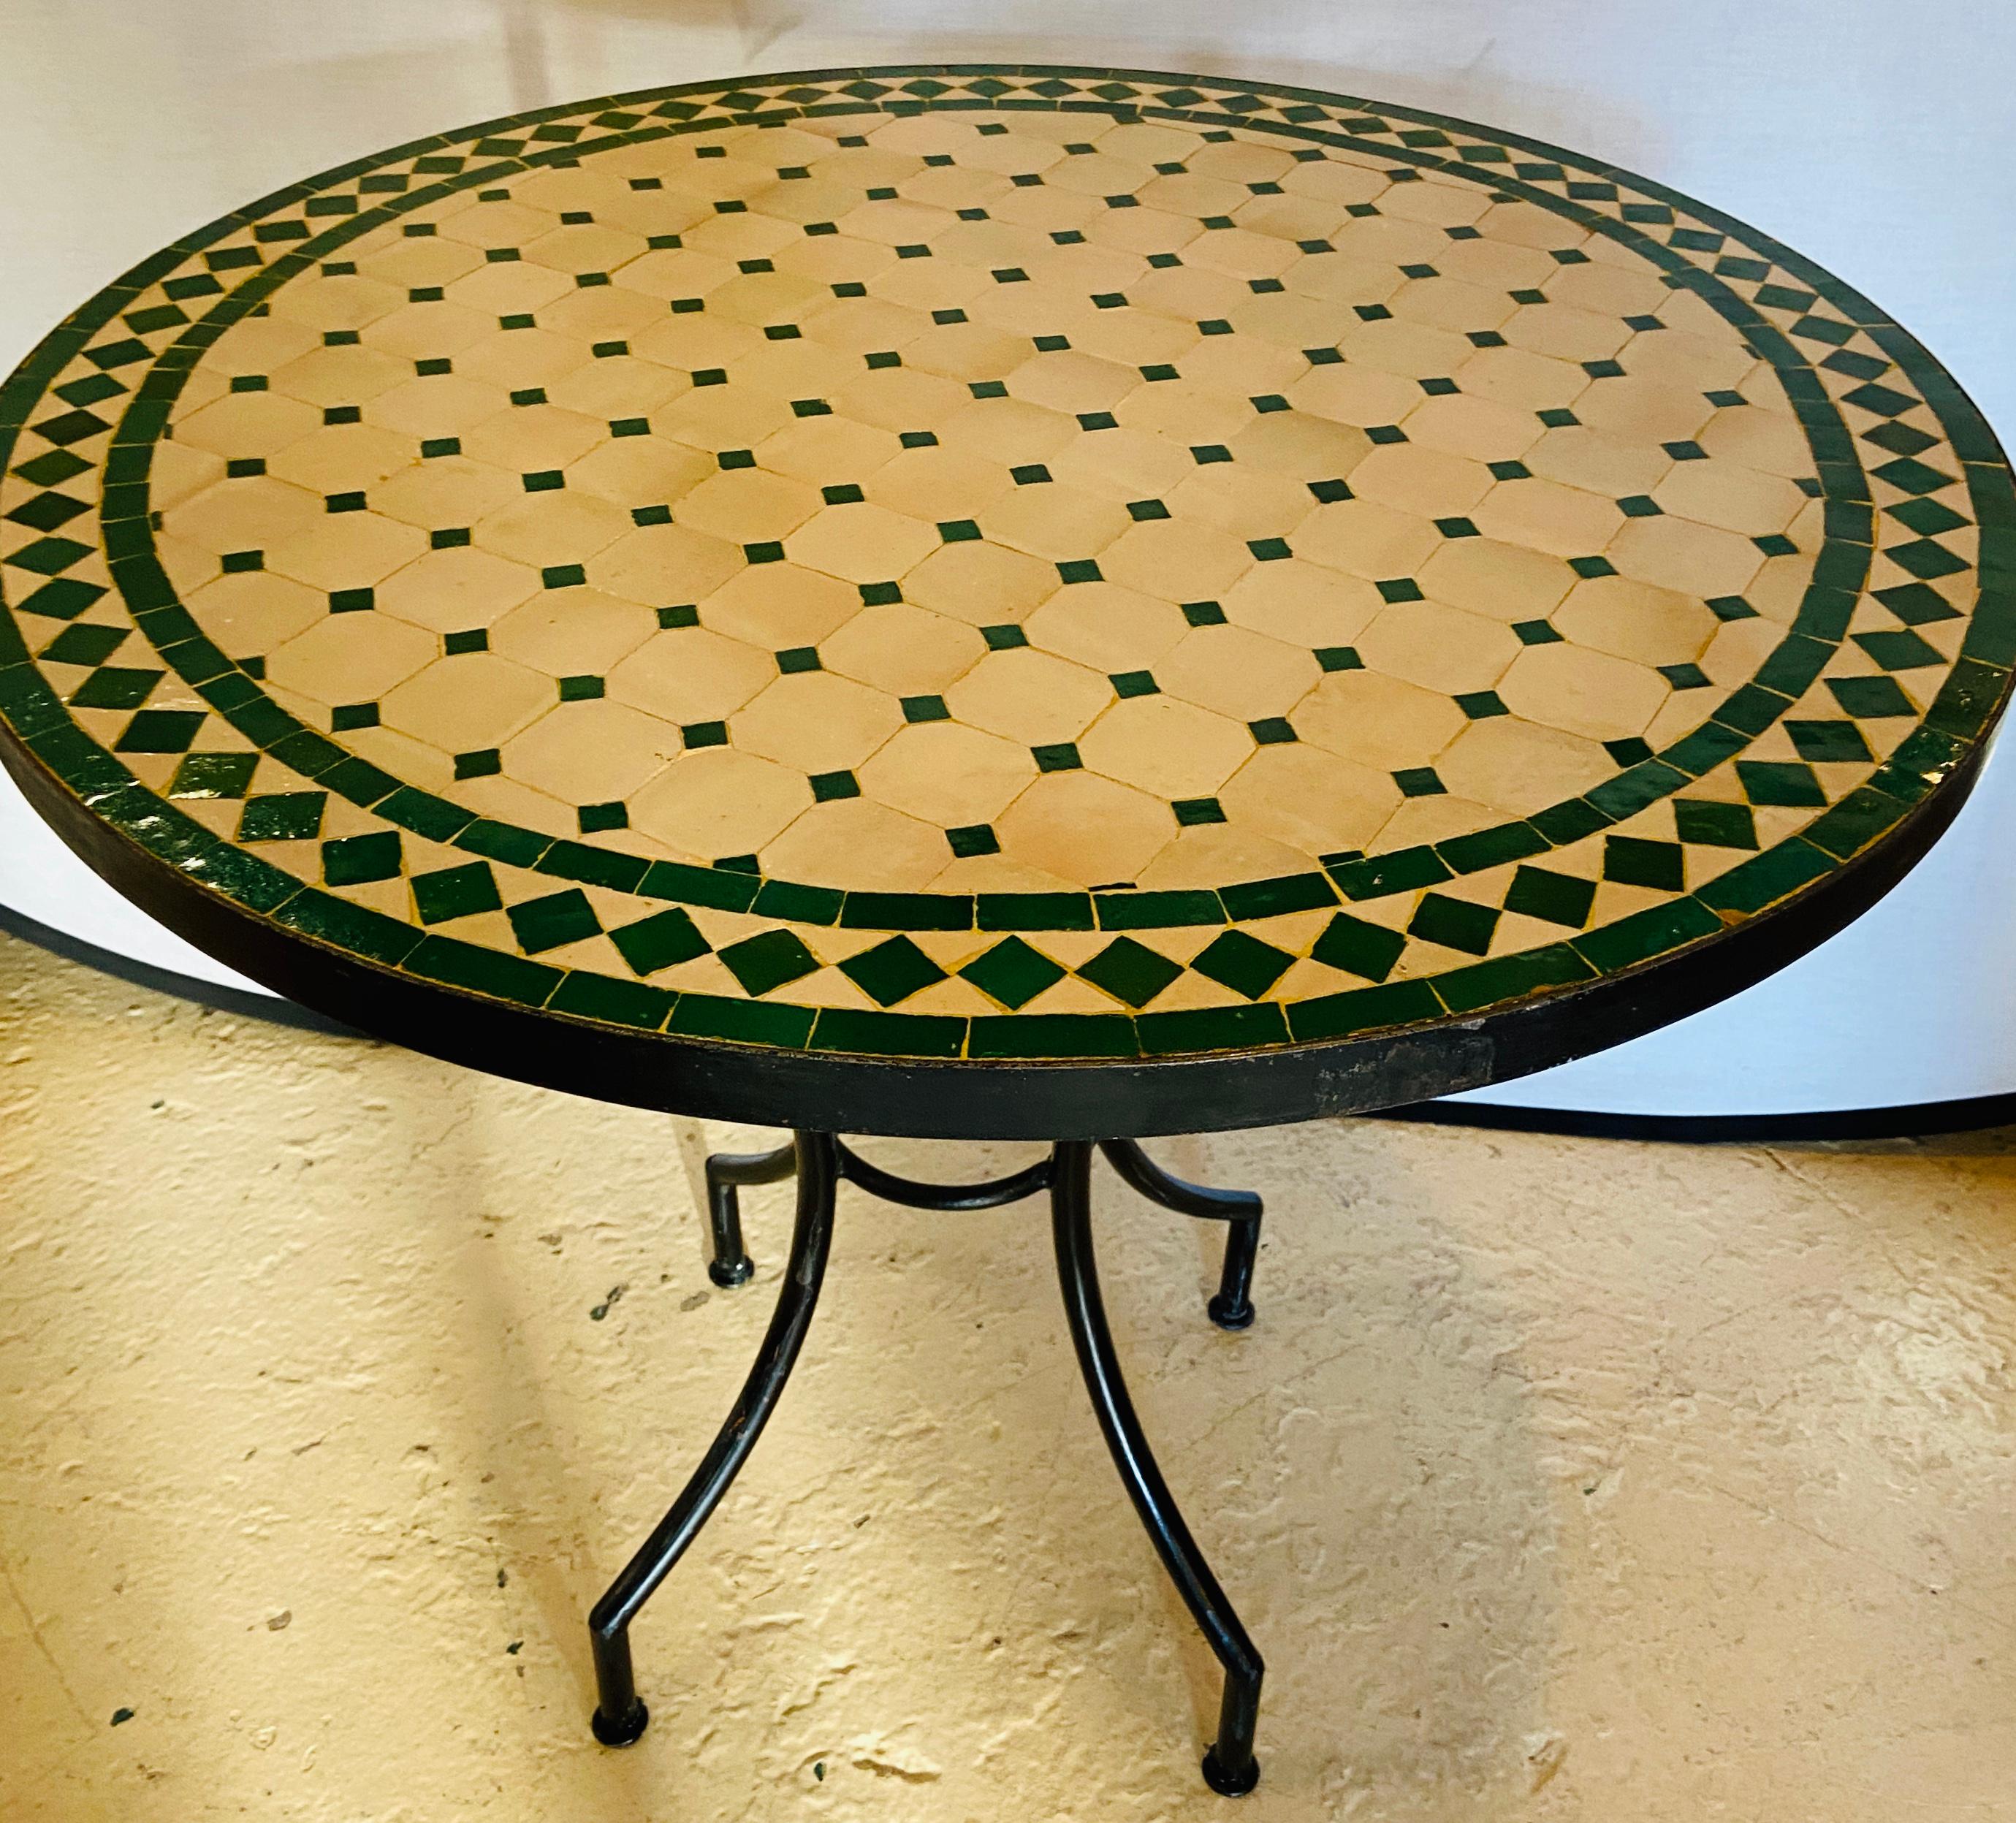 Late 20th Century Moroccan Mosaic Bistro or Garden Table in Green and Off-White